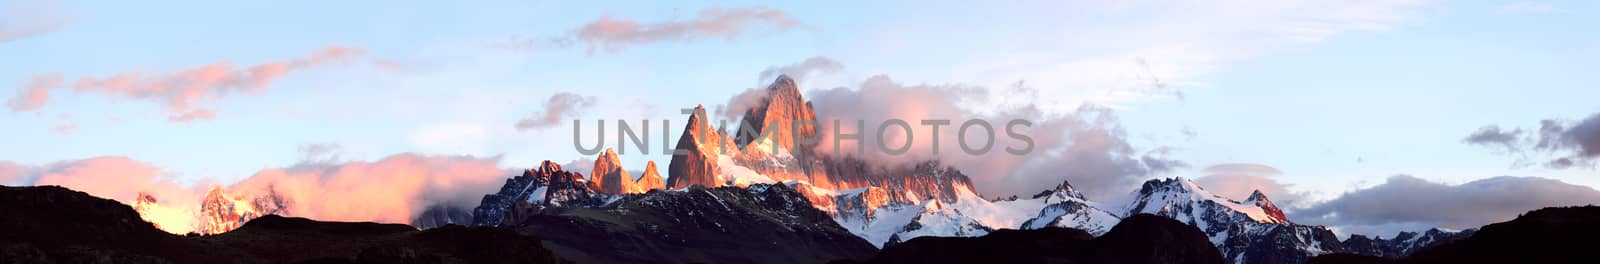 Andes in the fire. Giant panorama of mountain range Fitz Roy, Glaciers National Park Argentina, Patagonia